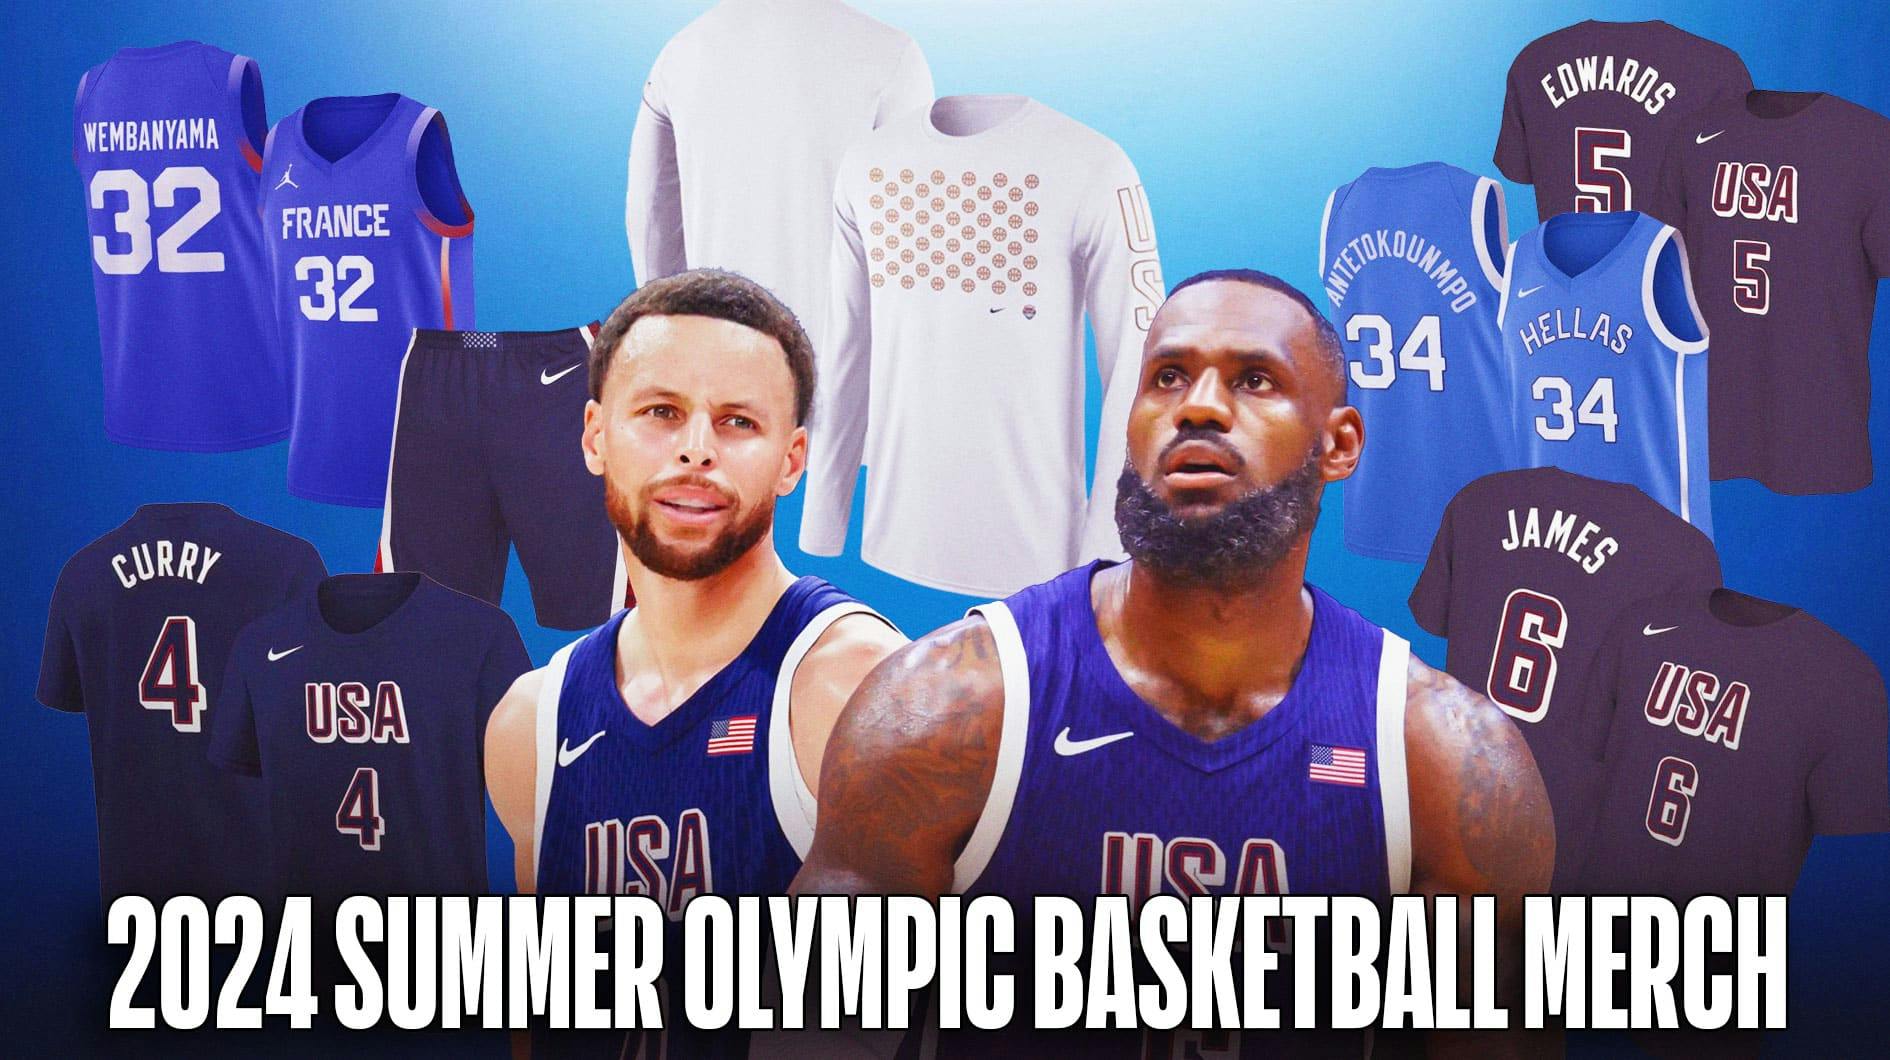 LeBron James and Steph Curry surrounded by 2024 Summer Olympics basketball merch on a blue background.